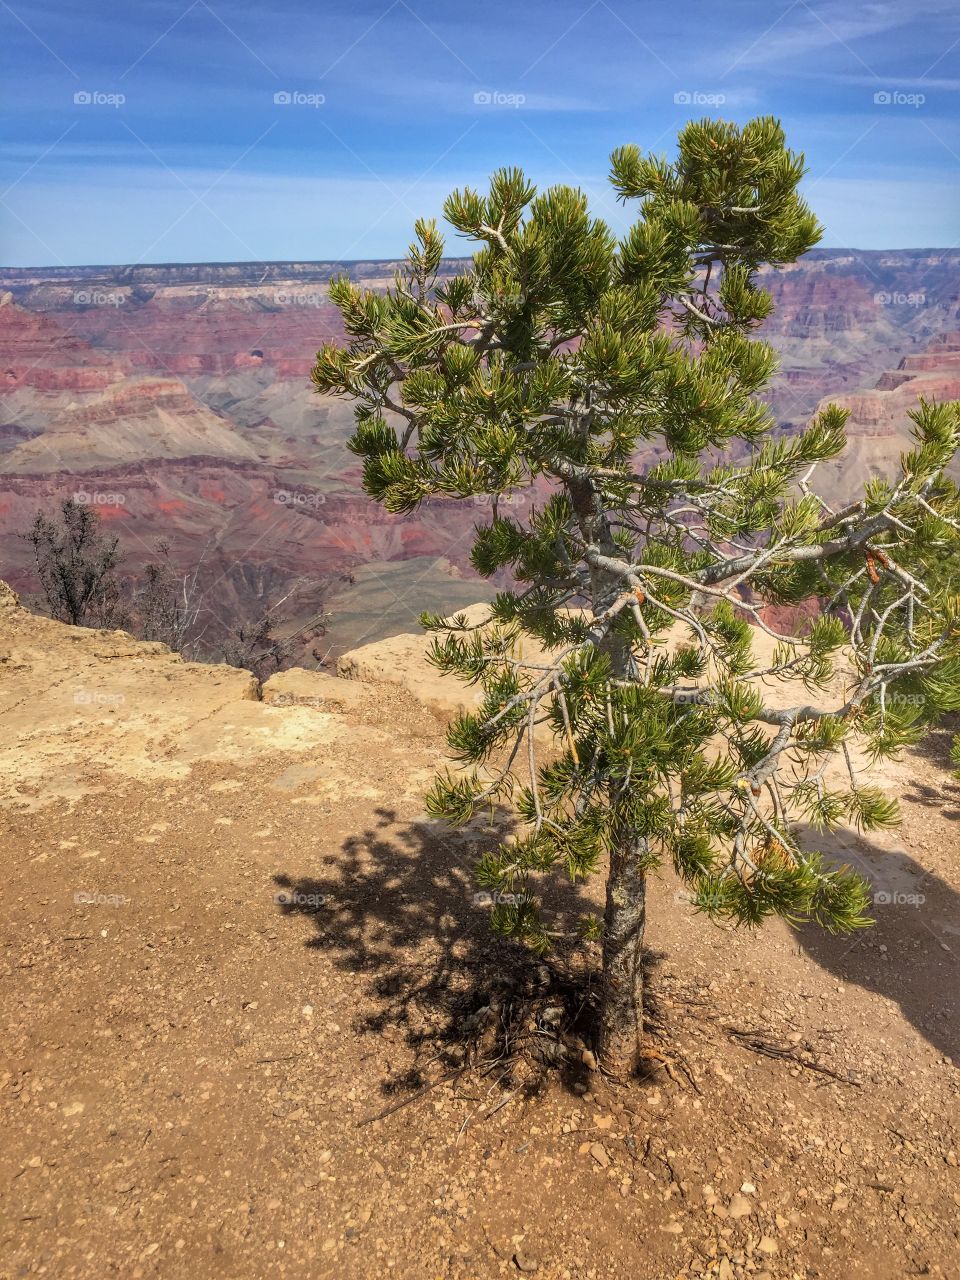 Lonely canyon tree
